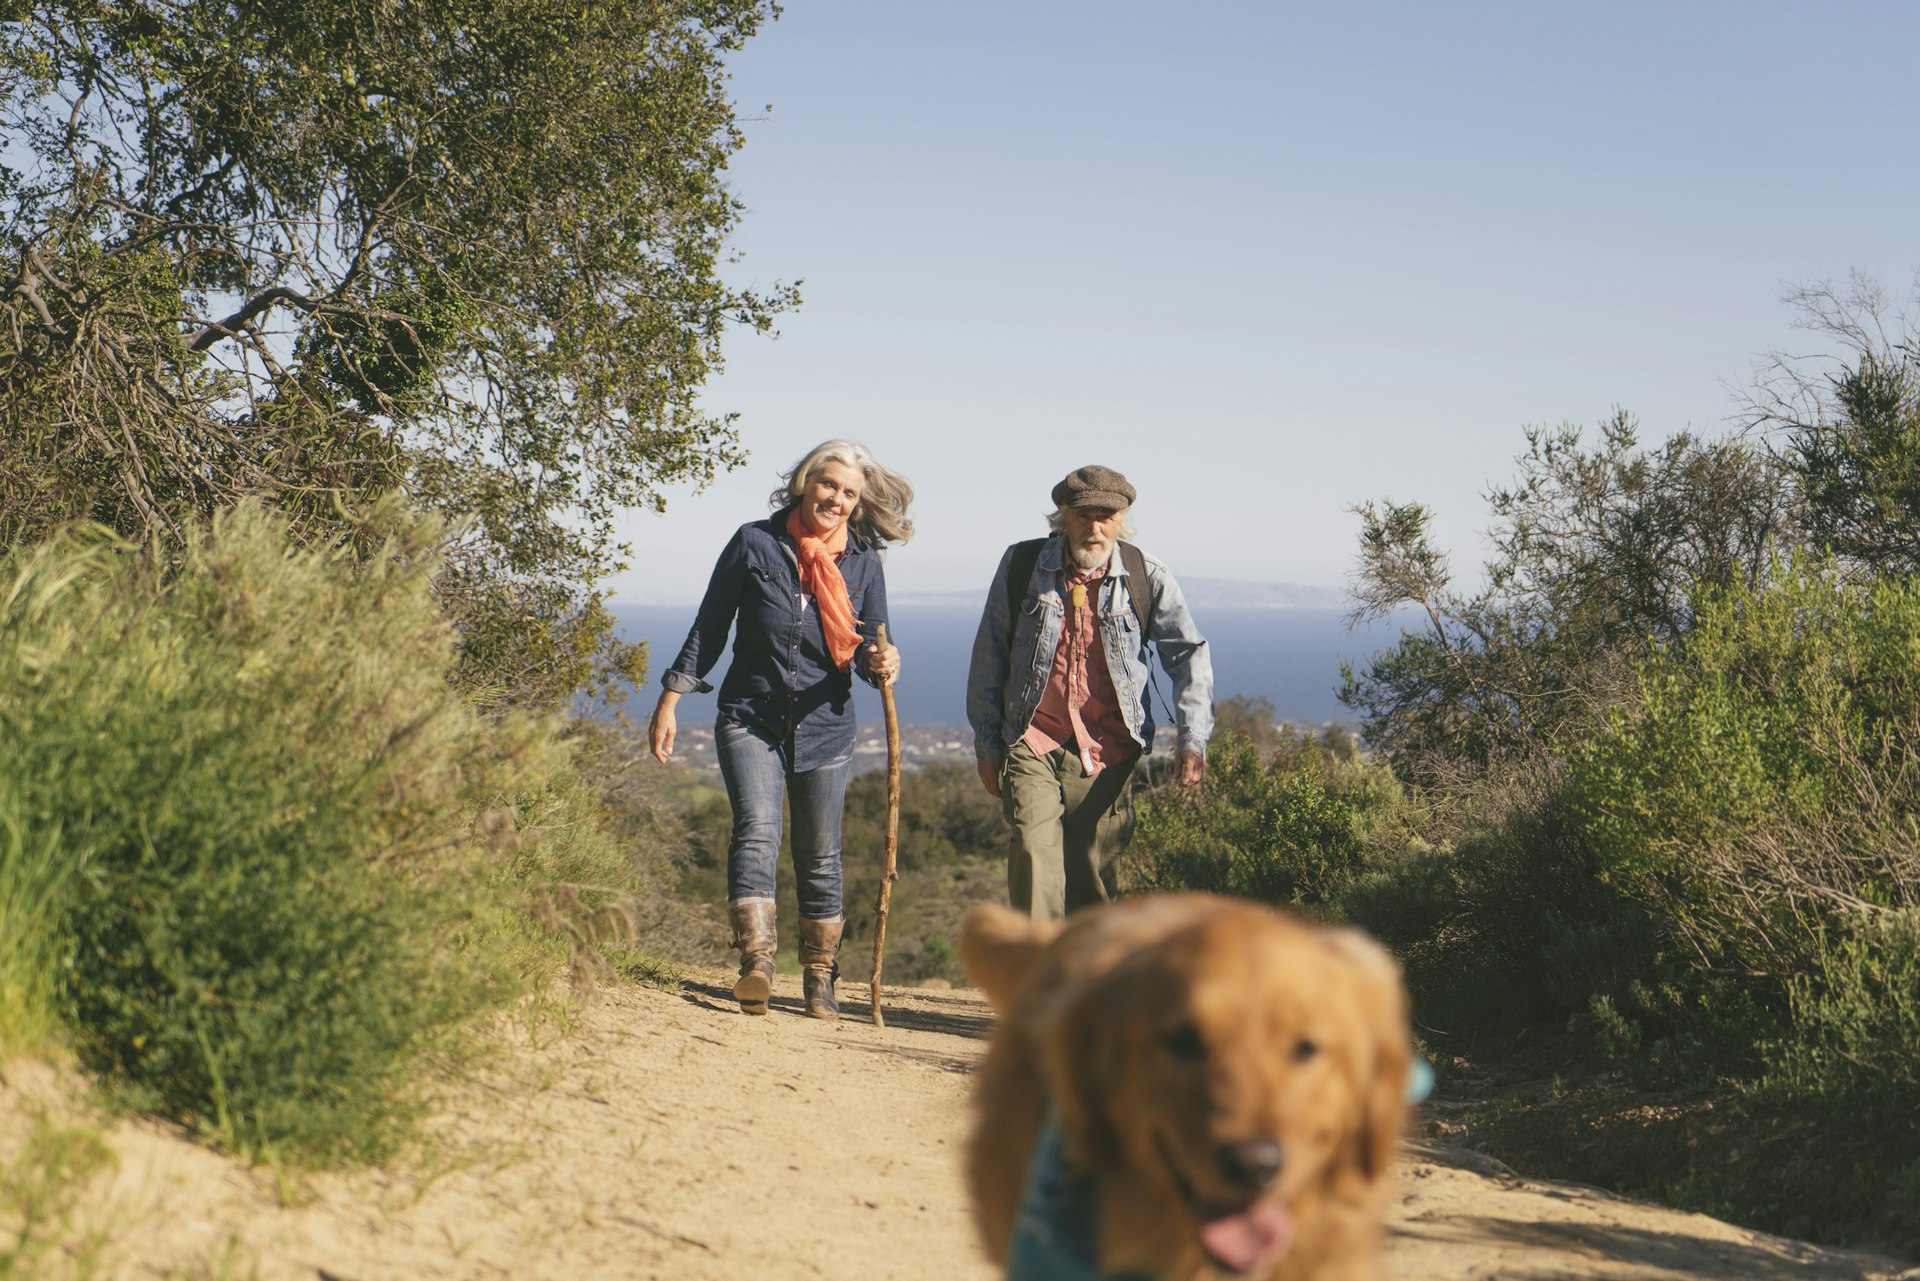 A middle aged woman and man walk along the Solstice Canyon in LA's Santa Monica Mountains following their labrador dog